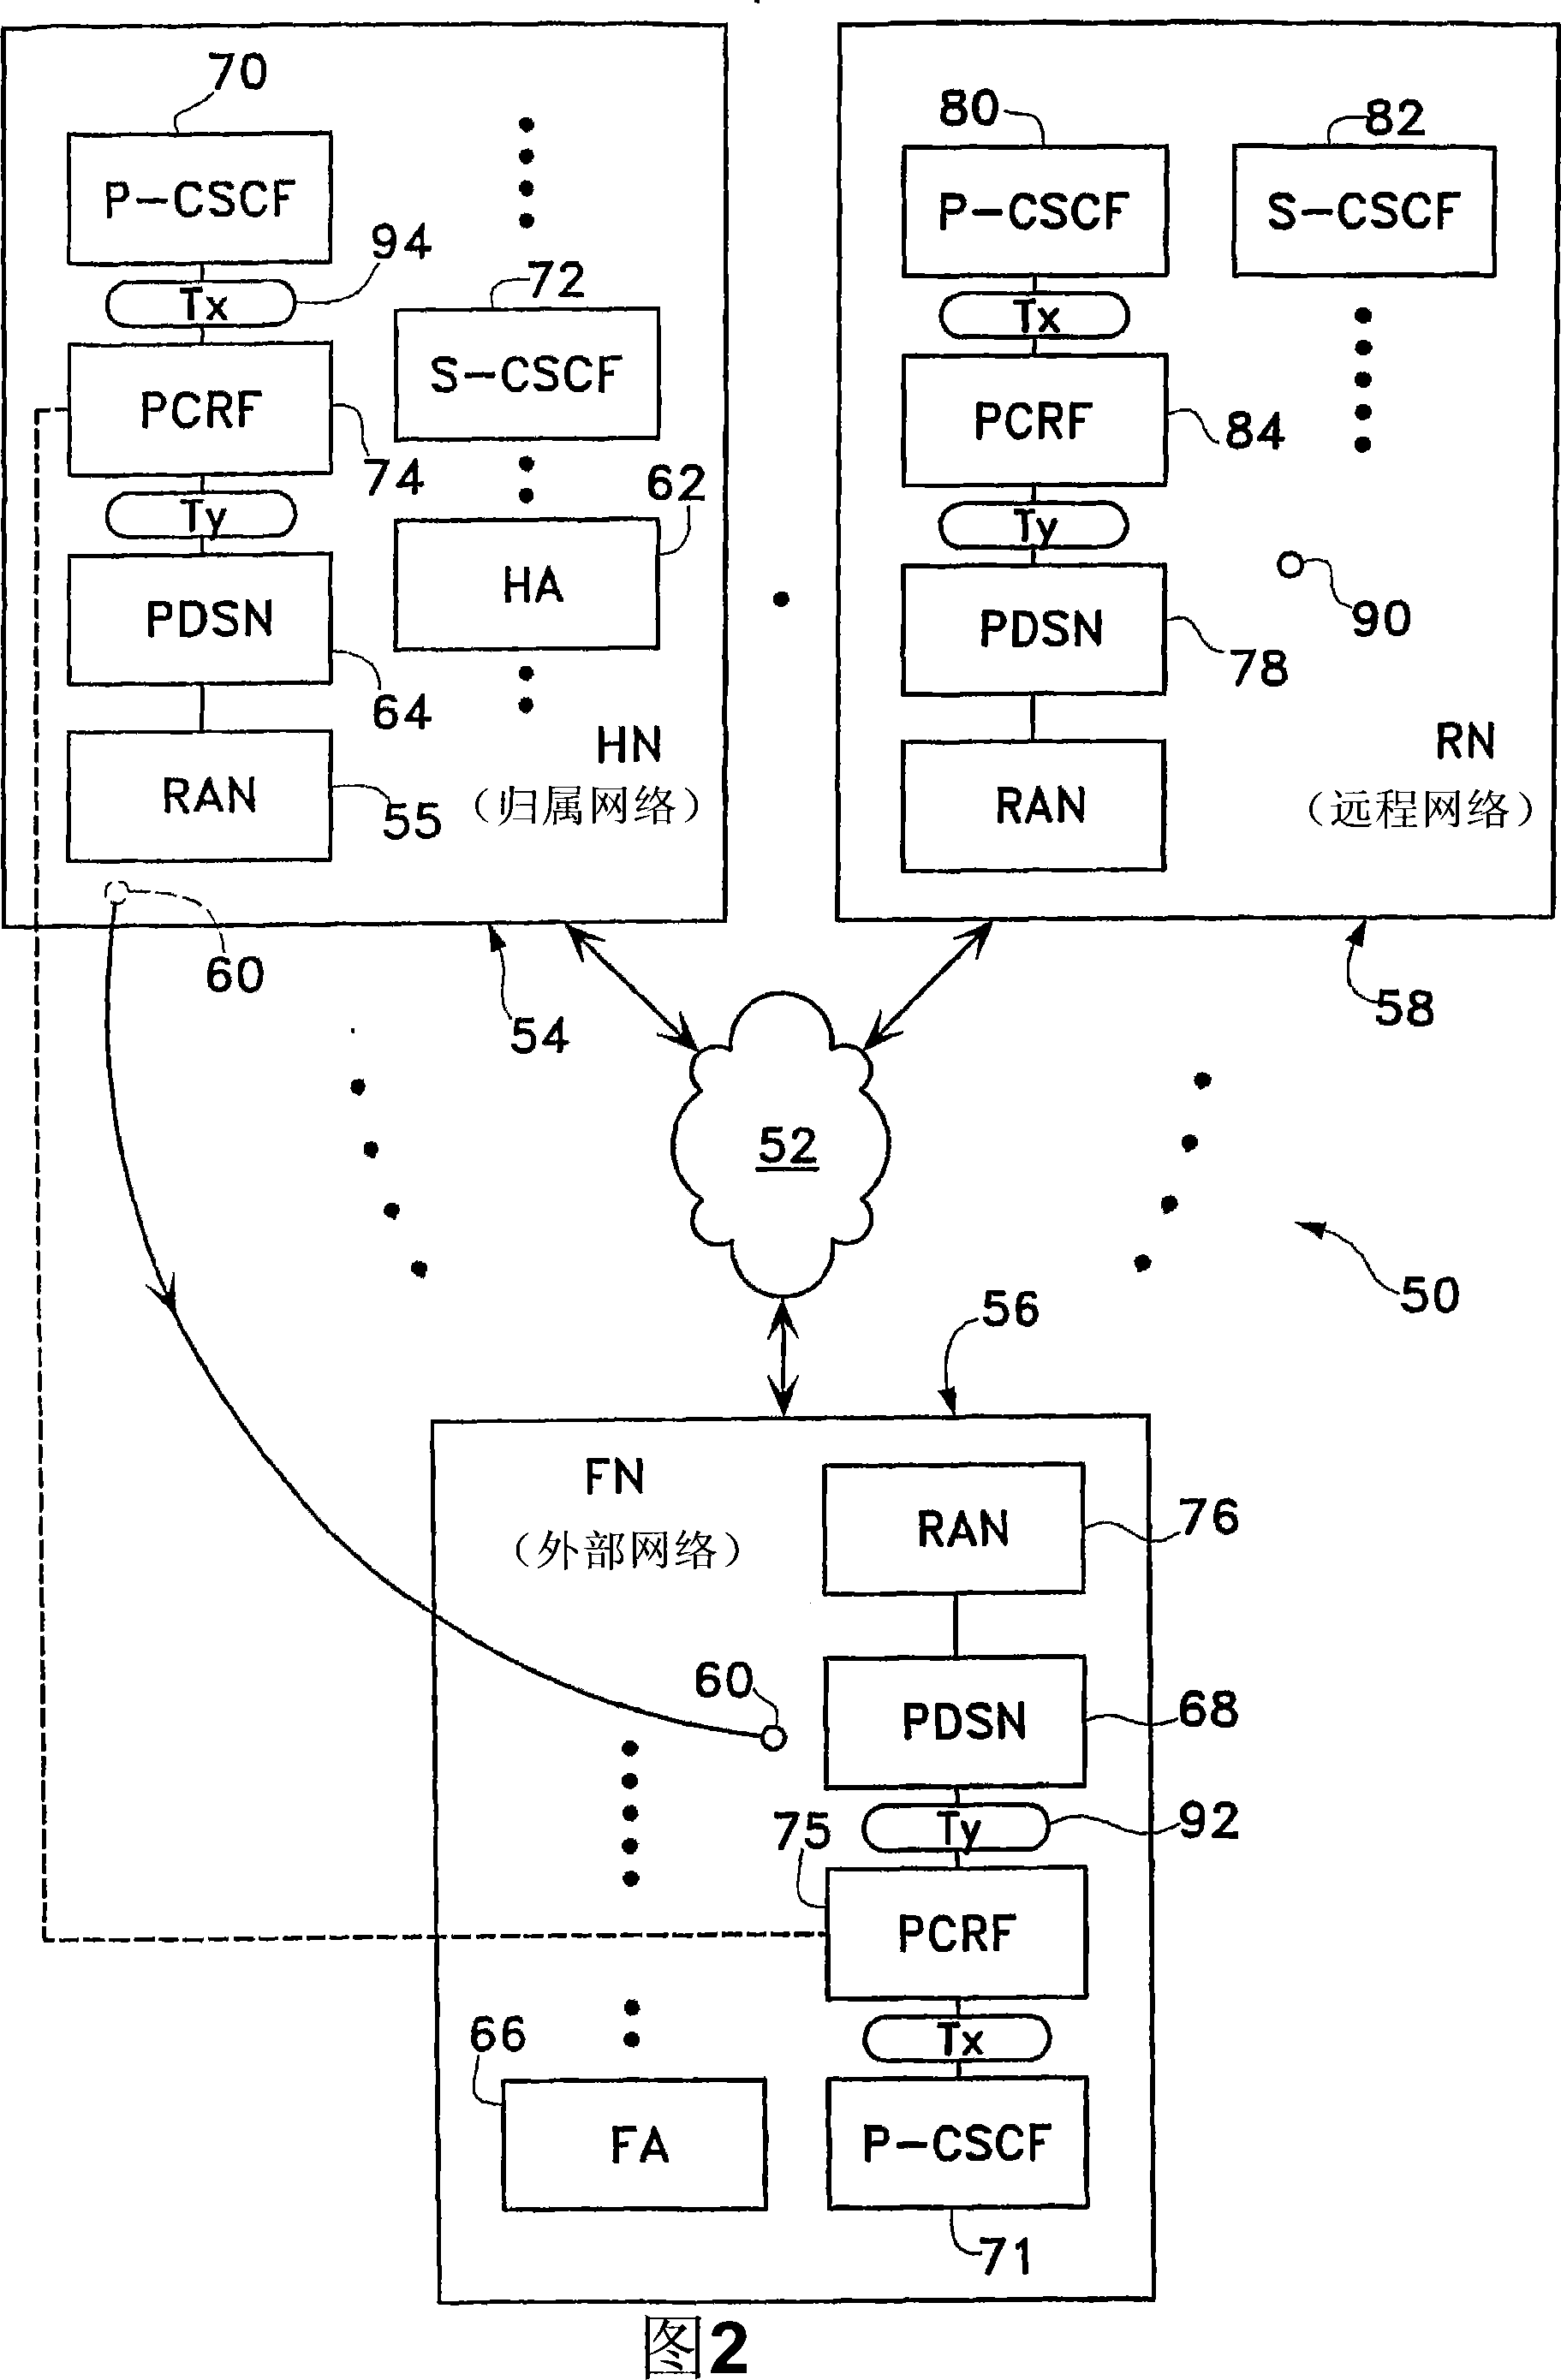 Bearer control of encrypted data flows in packet data communications